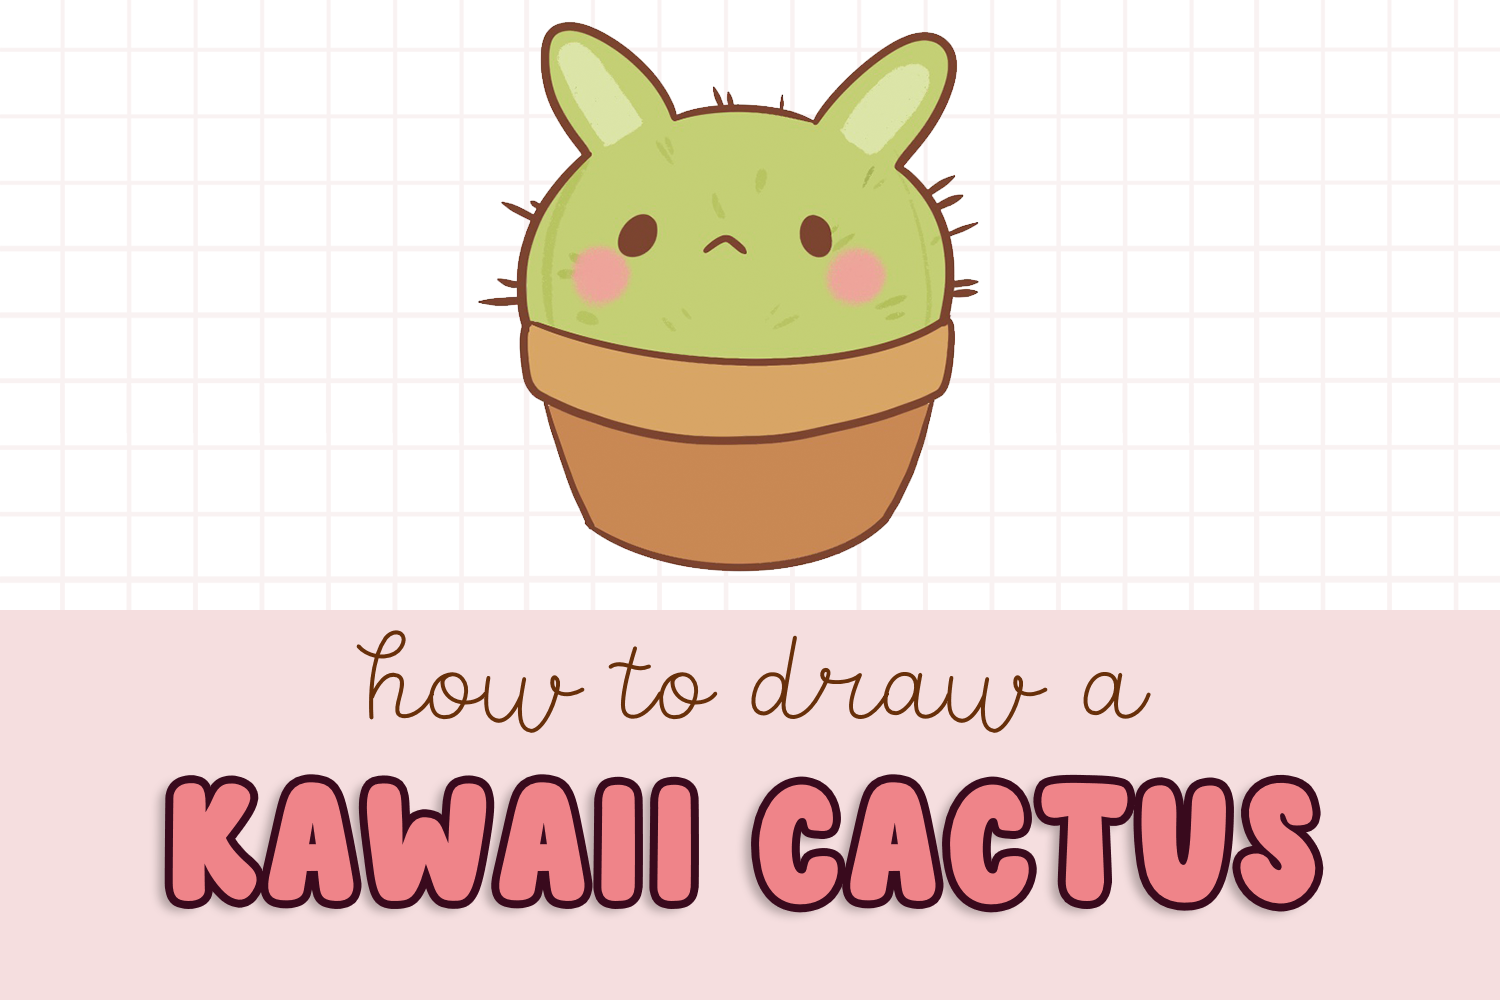 You Can Draw Cute People the Easy Way! Learn Drawing for Beginners |  Yasmina Creates | Skillshare